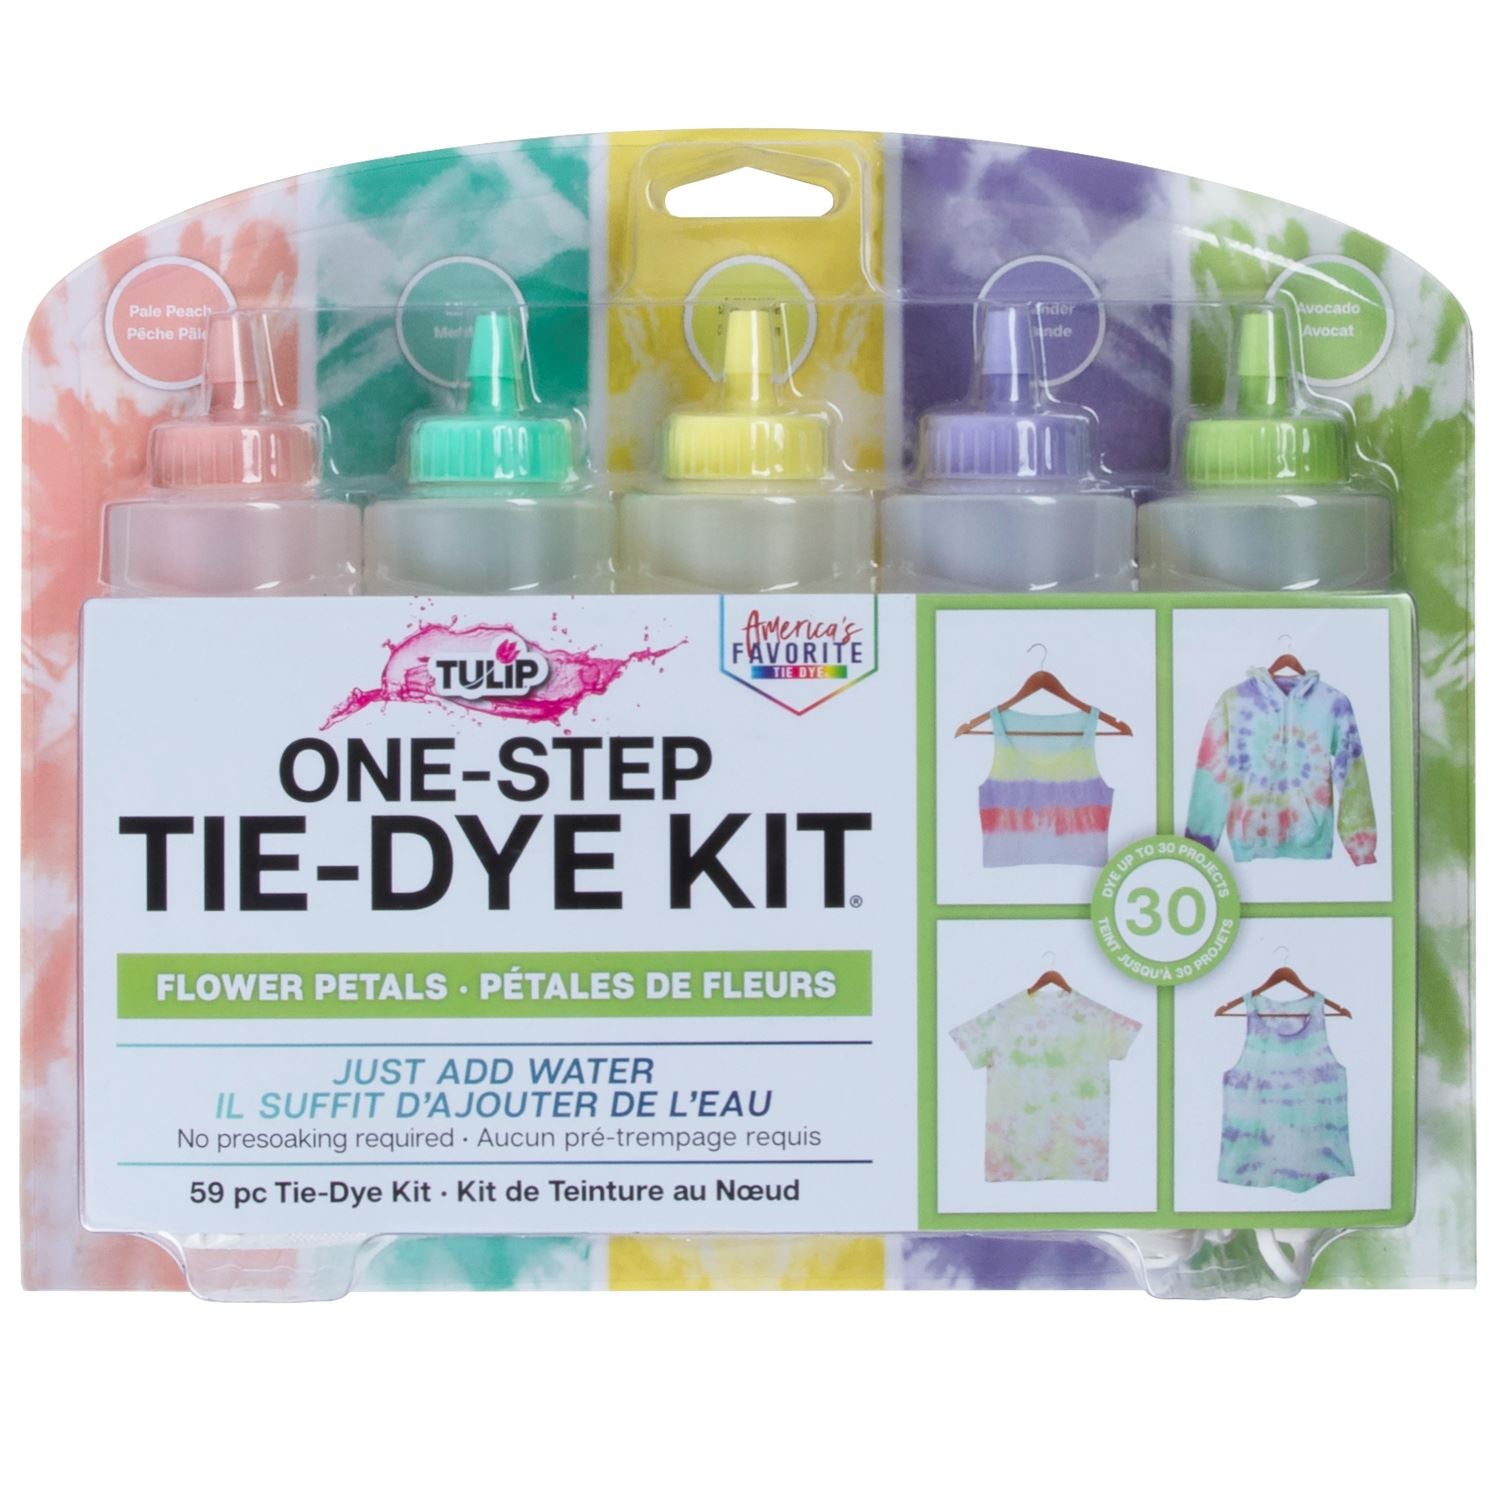 Tulip One-Step Tie-Dye 8 Color Kit Celestial, Galaxy of Colors